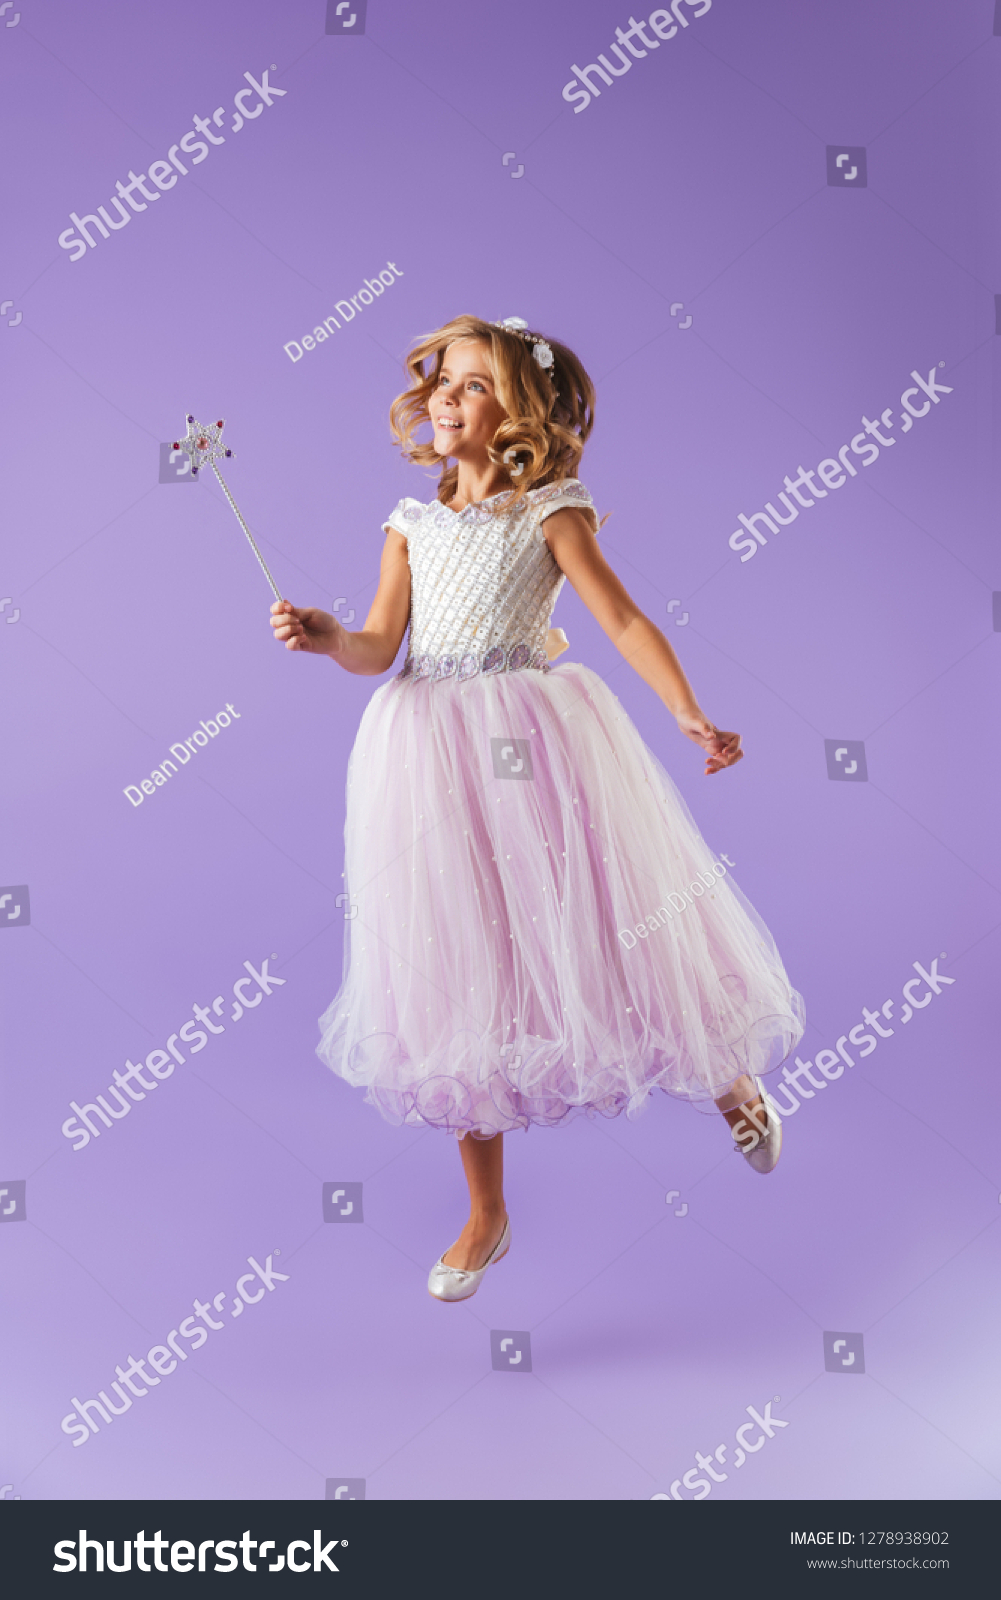 Full length portrait of a smiling pretty girl dressed in a princess dress isolated over violet background, holding magic wand, jumping #1278938902